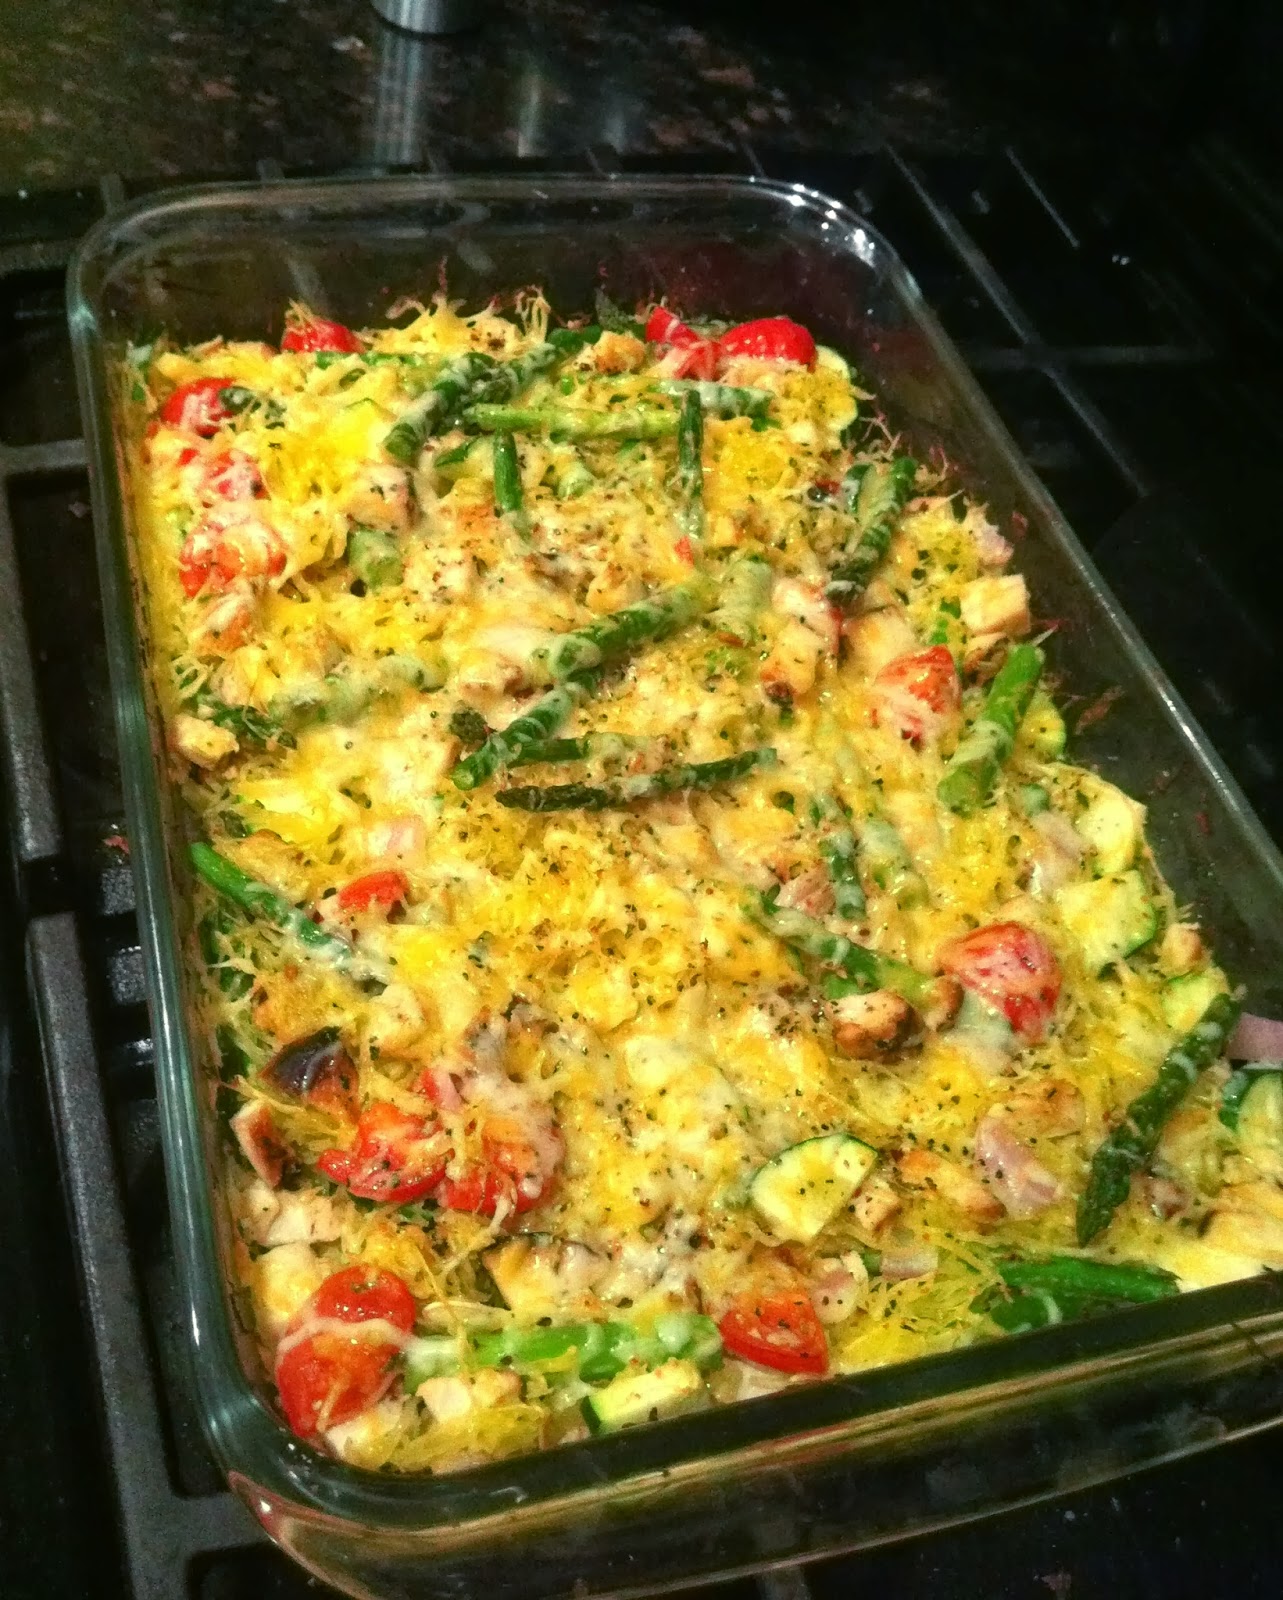 Cooking with Team[FIT]: My Favorite Spaghetti Squash Casserole